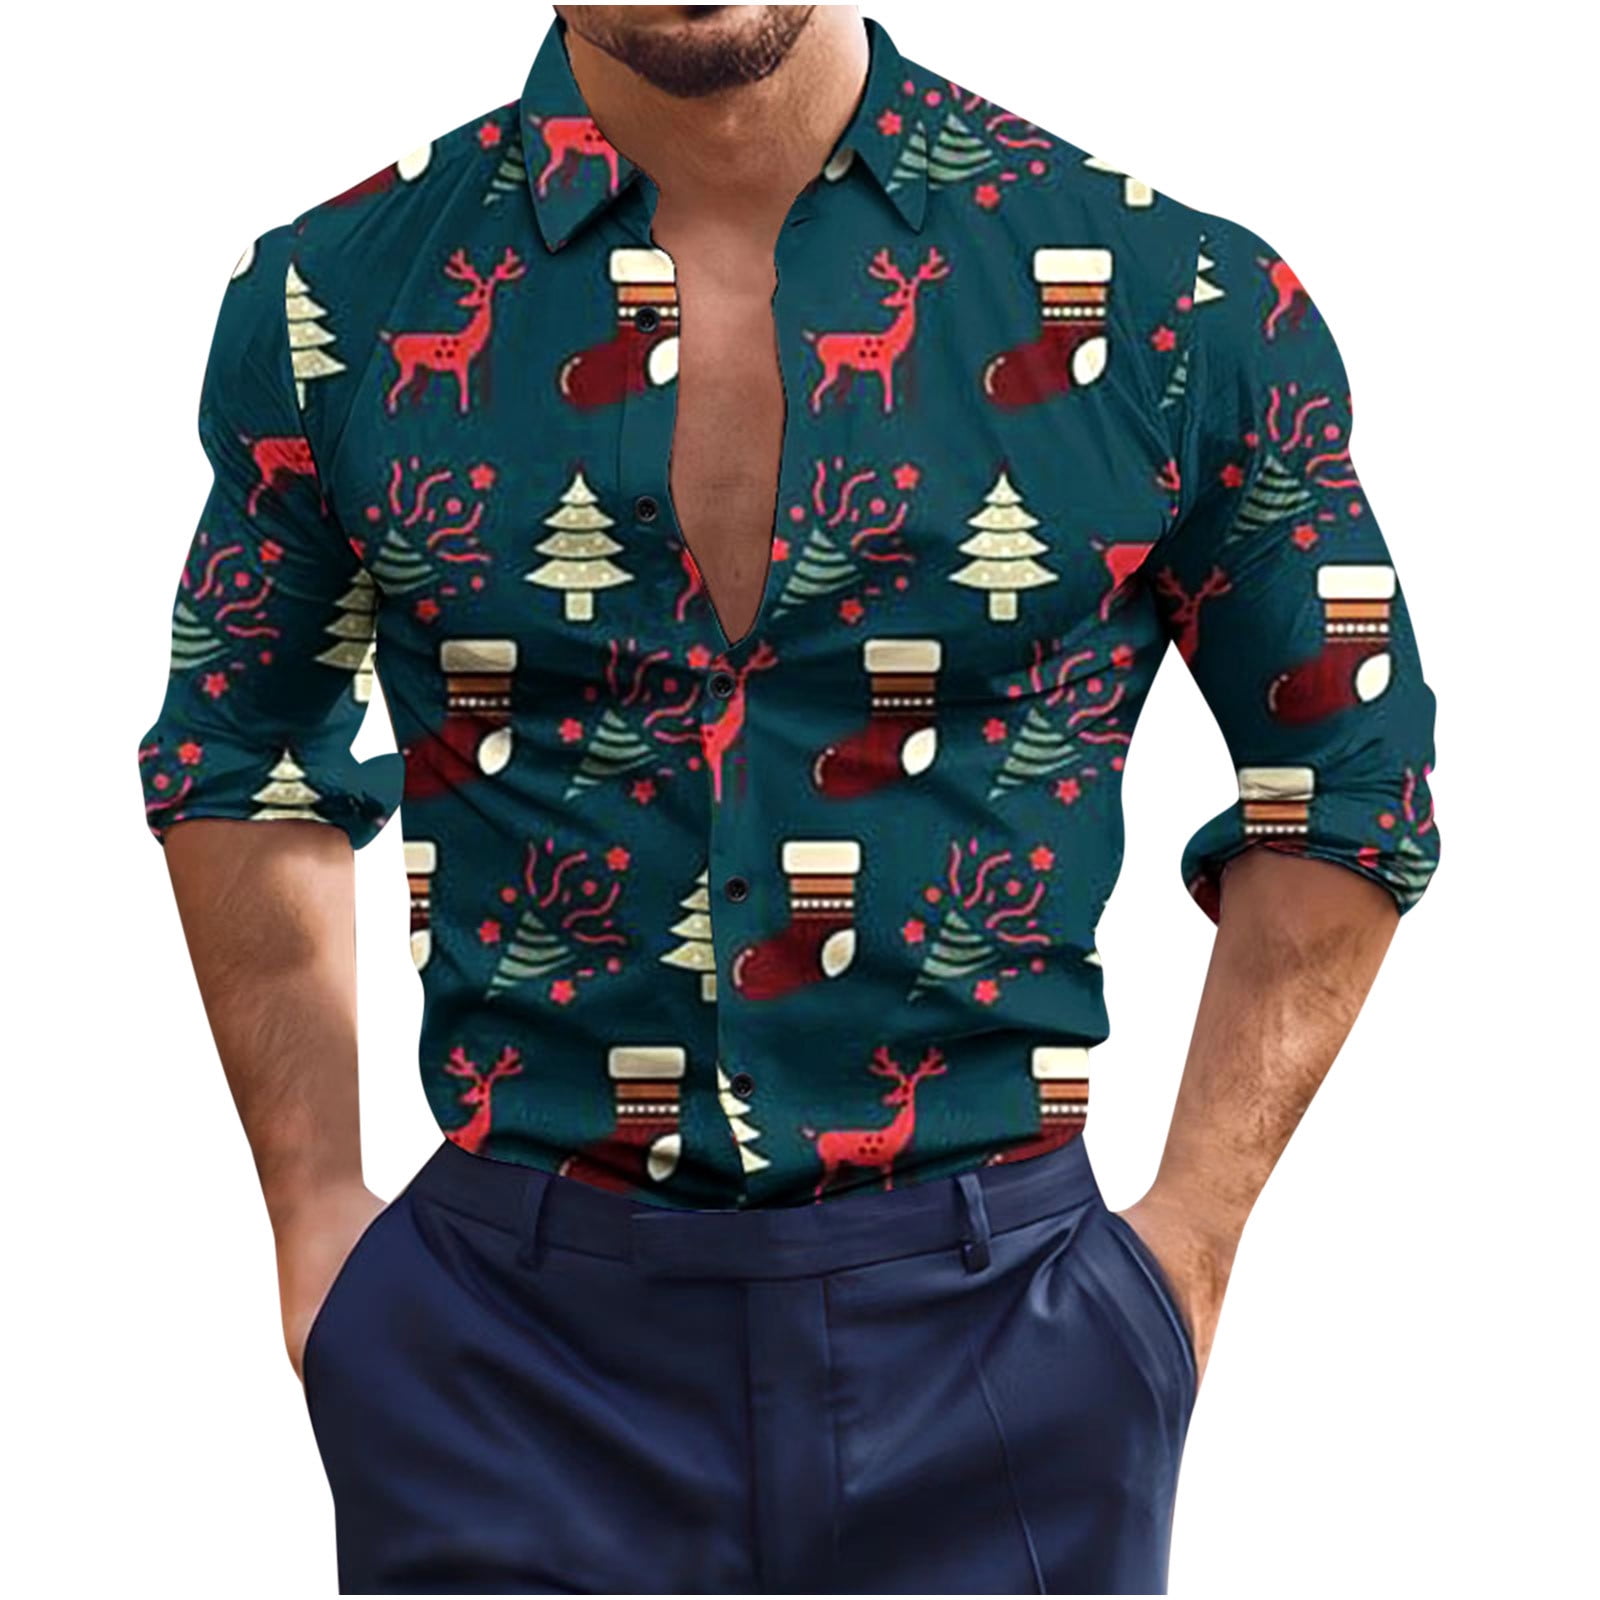 ZCFZJW Christmas Mens T Shirts Funny Holiday Print Long Sleeve Button Down  Novelty Shirt Casual Regular Fit Leisure T-Shirt Blue M